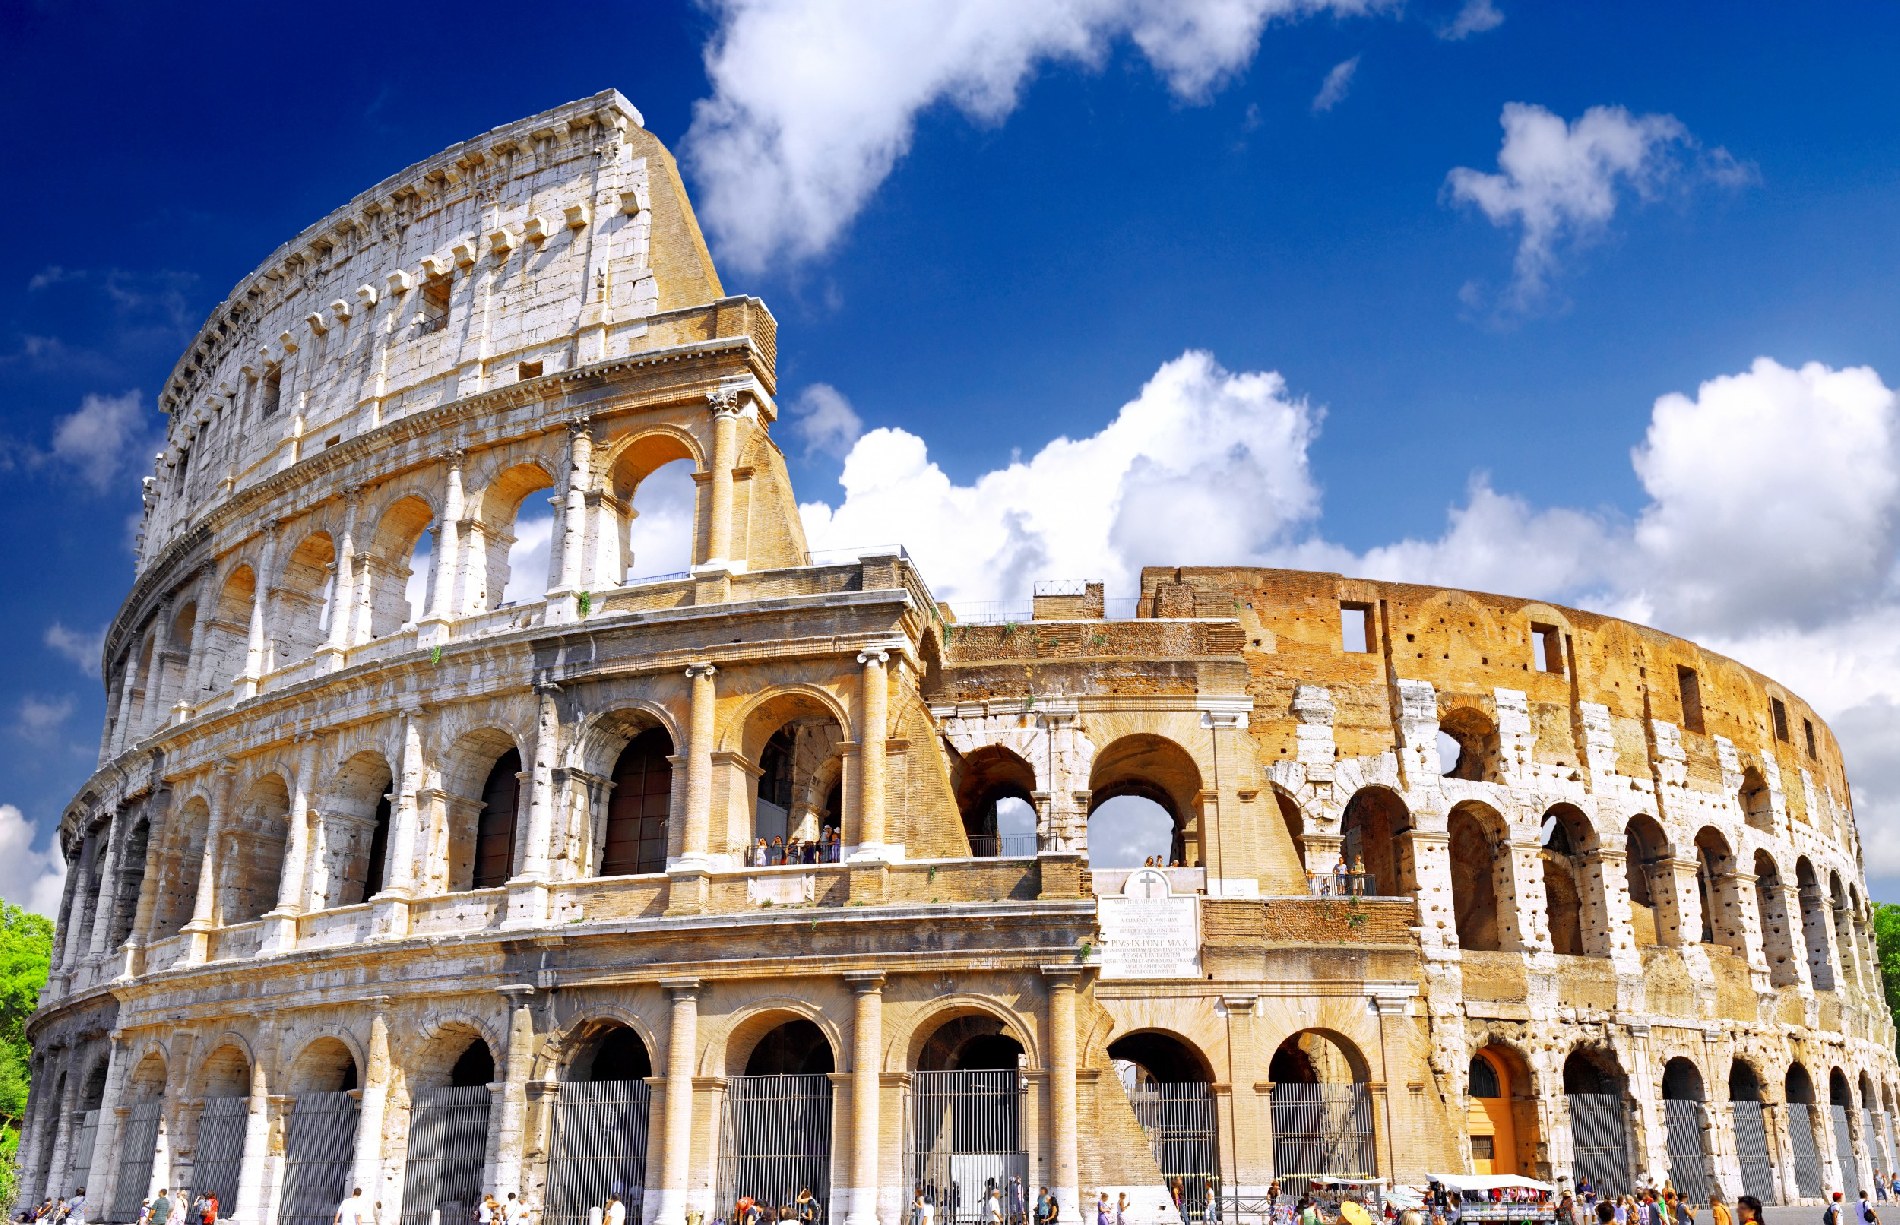 Nice Images Collection: Colosseum Desktop Wallpapers